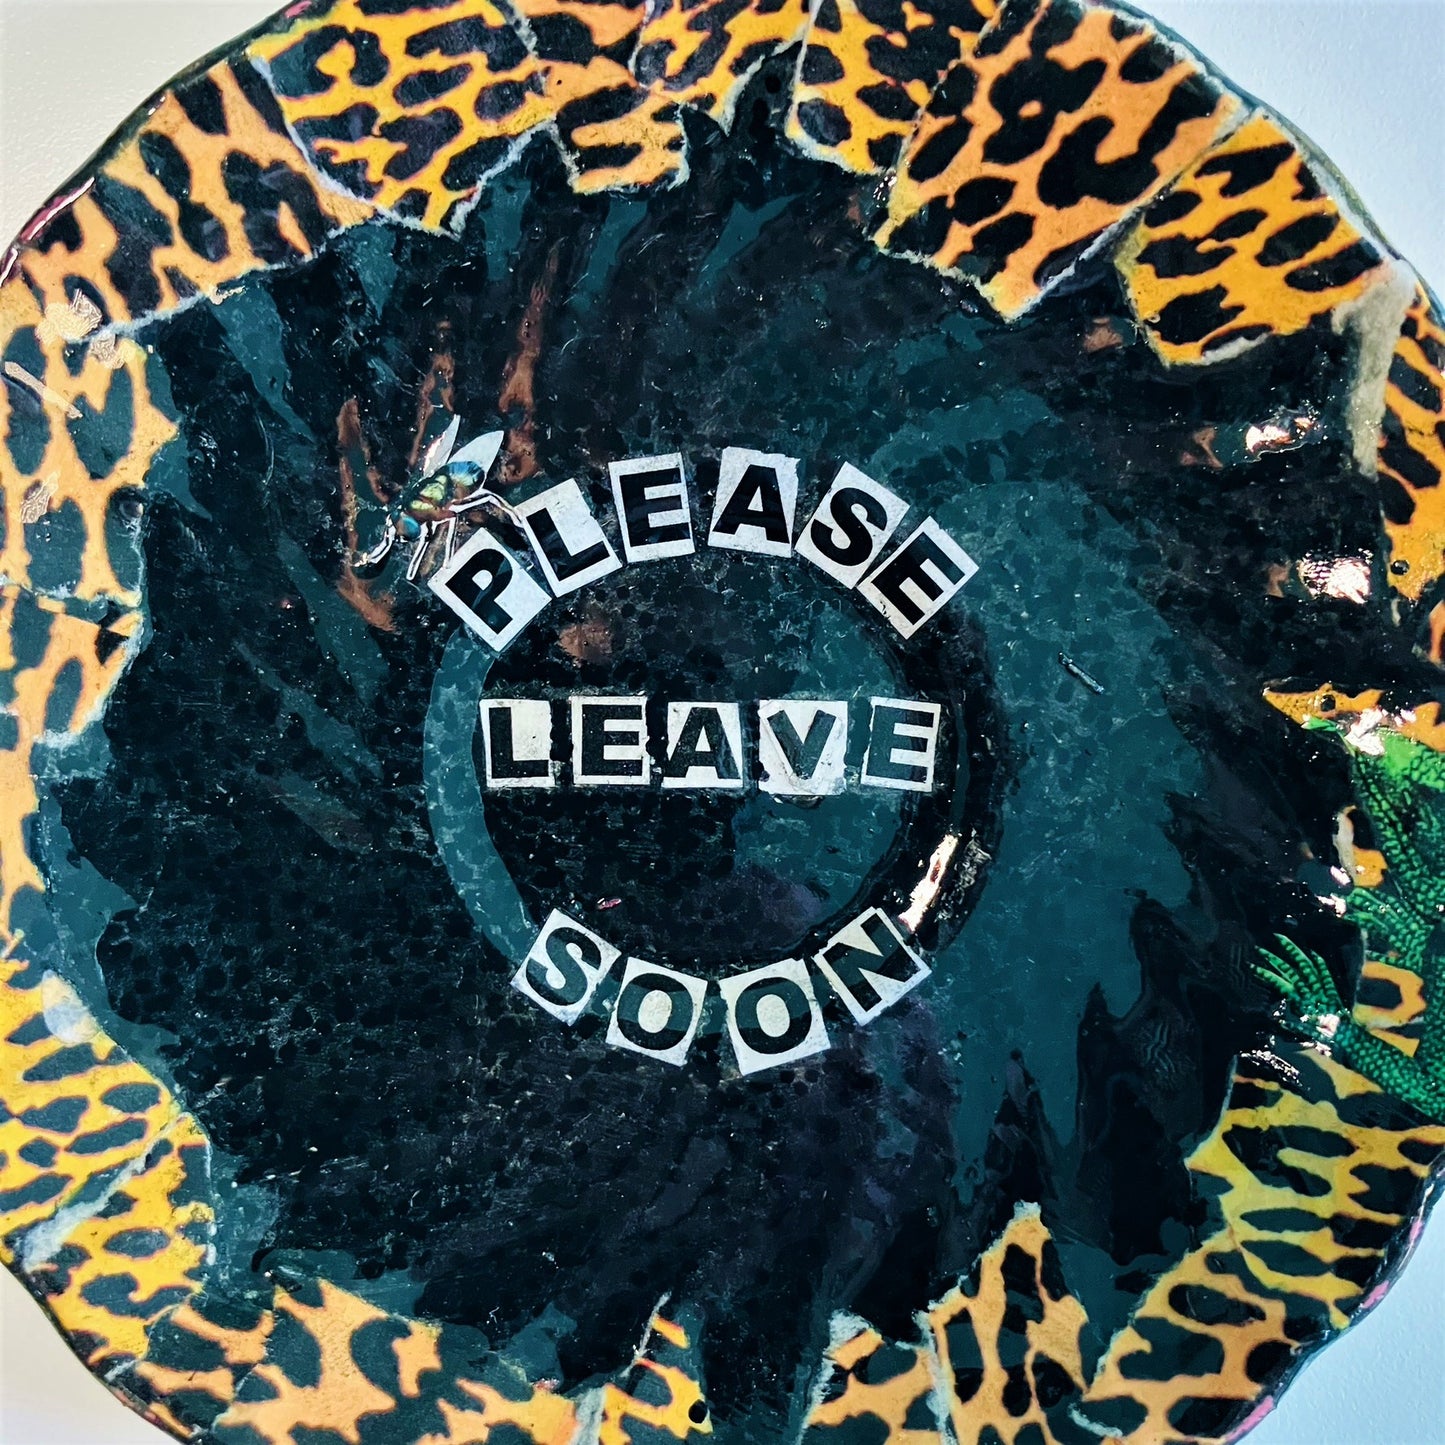 Black Upcycled Wall Plate - "Please Leave Soon" - by House of Frisson